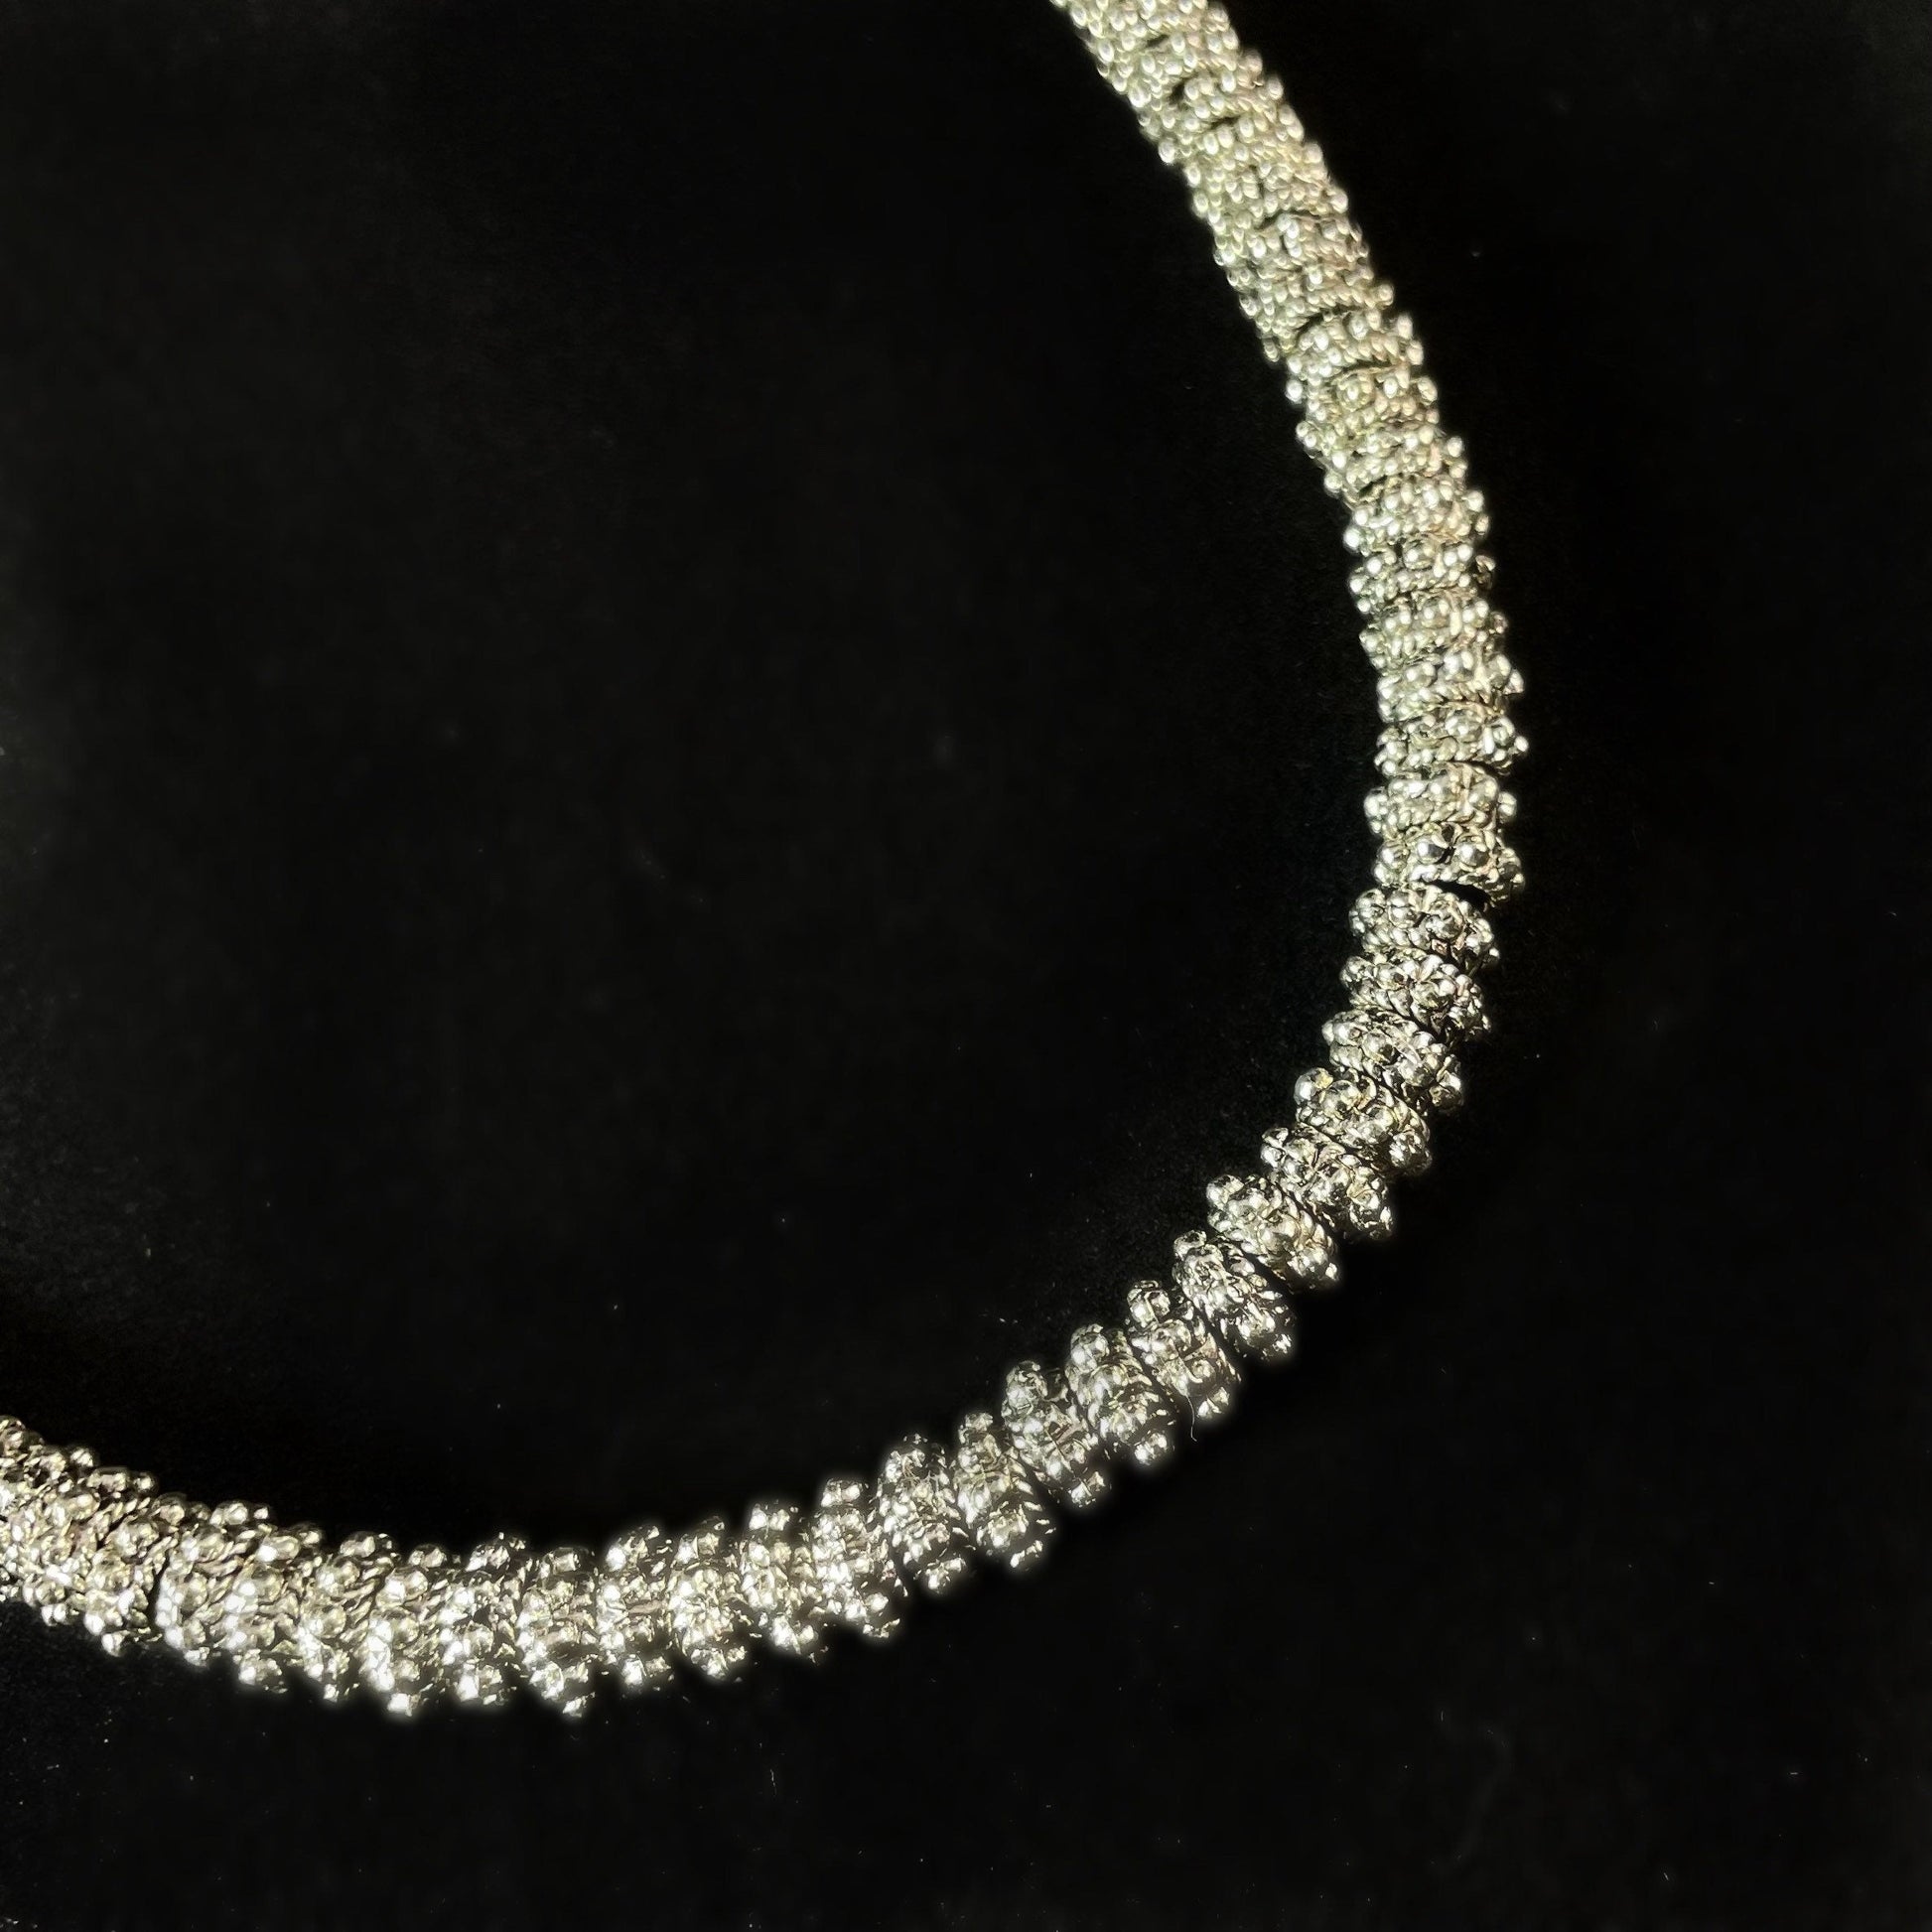 Silver Textured Necklace - Handmade in Spain